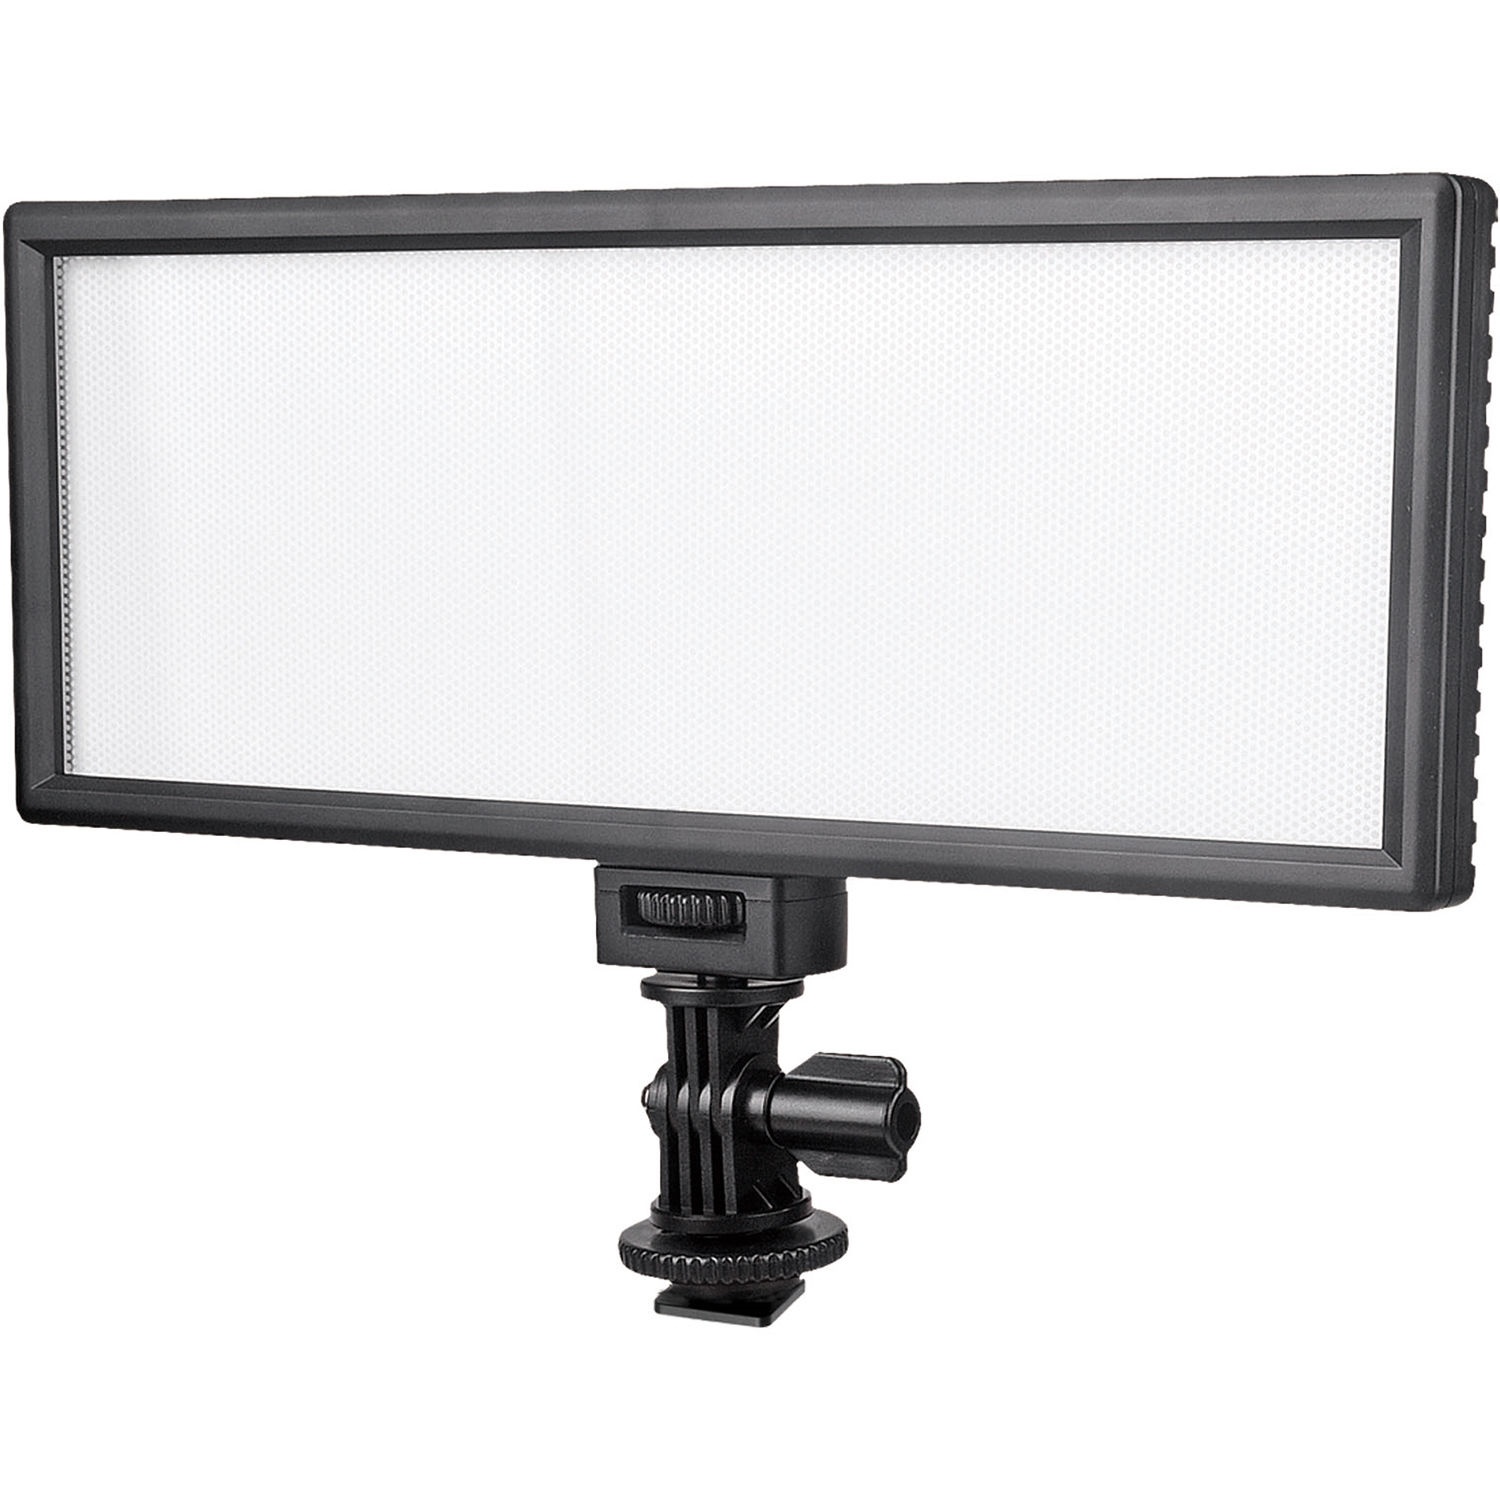 Viltrox L132T On-Camera Bi-Colour LED Light with LCD Display